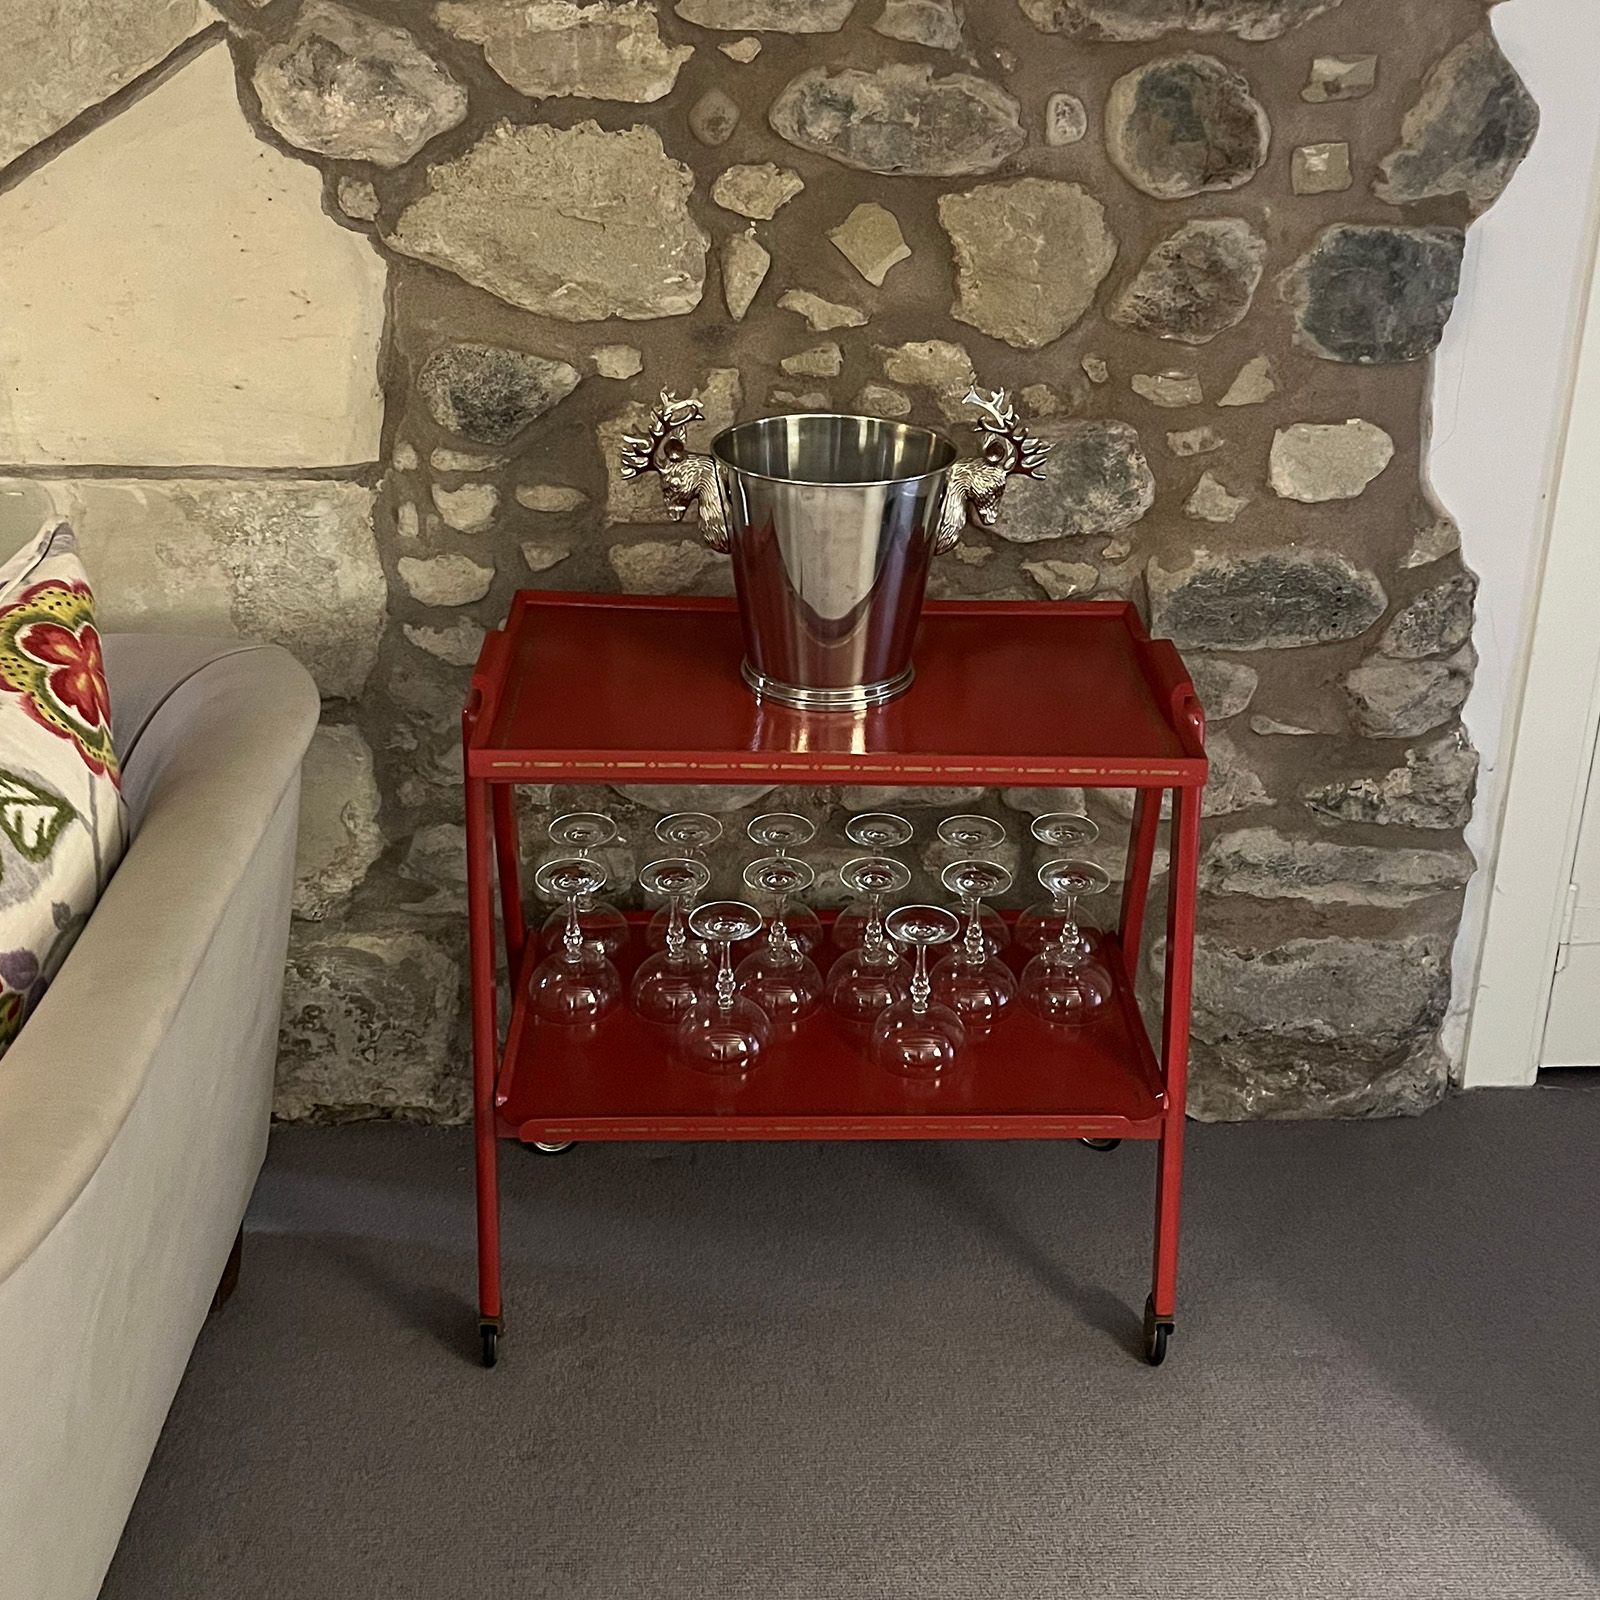 Retro red drinks trolley, ready to offer sustanance to guests.